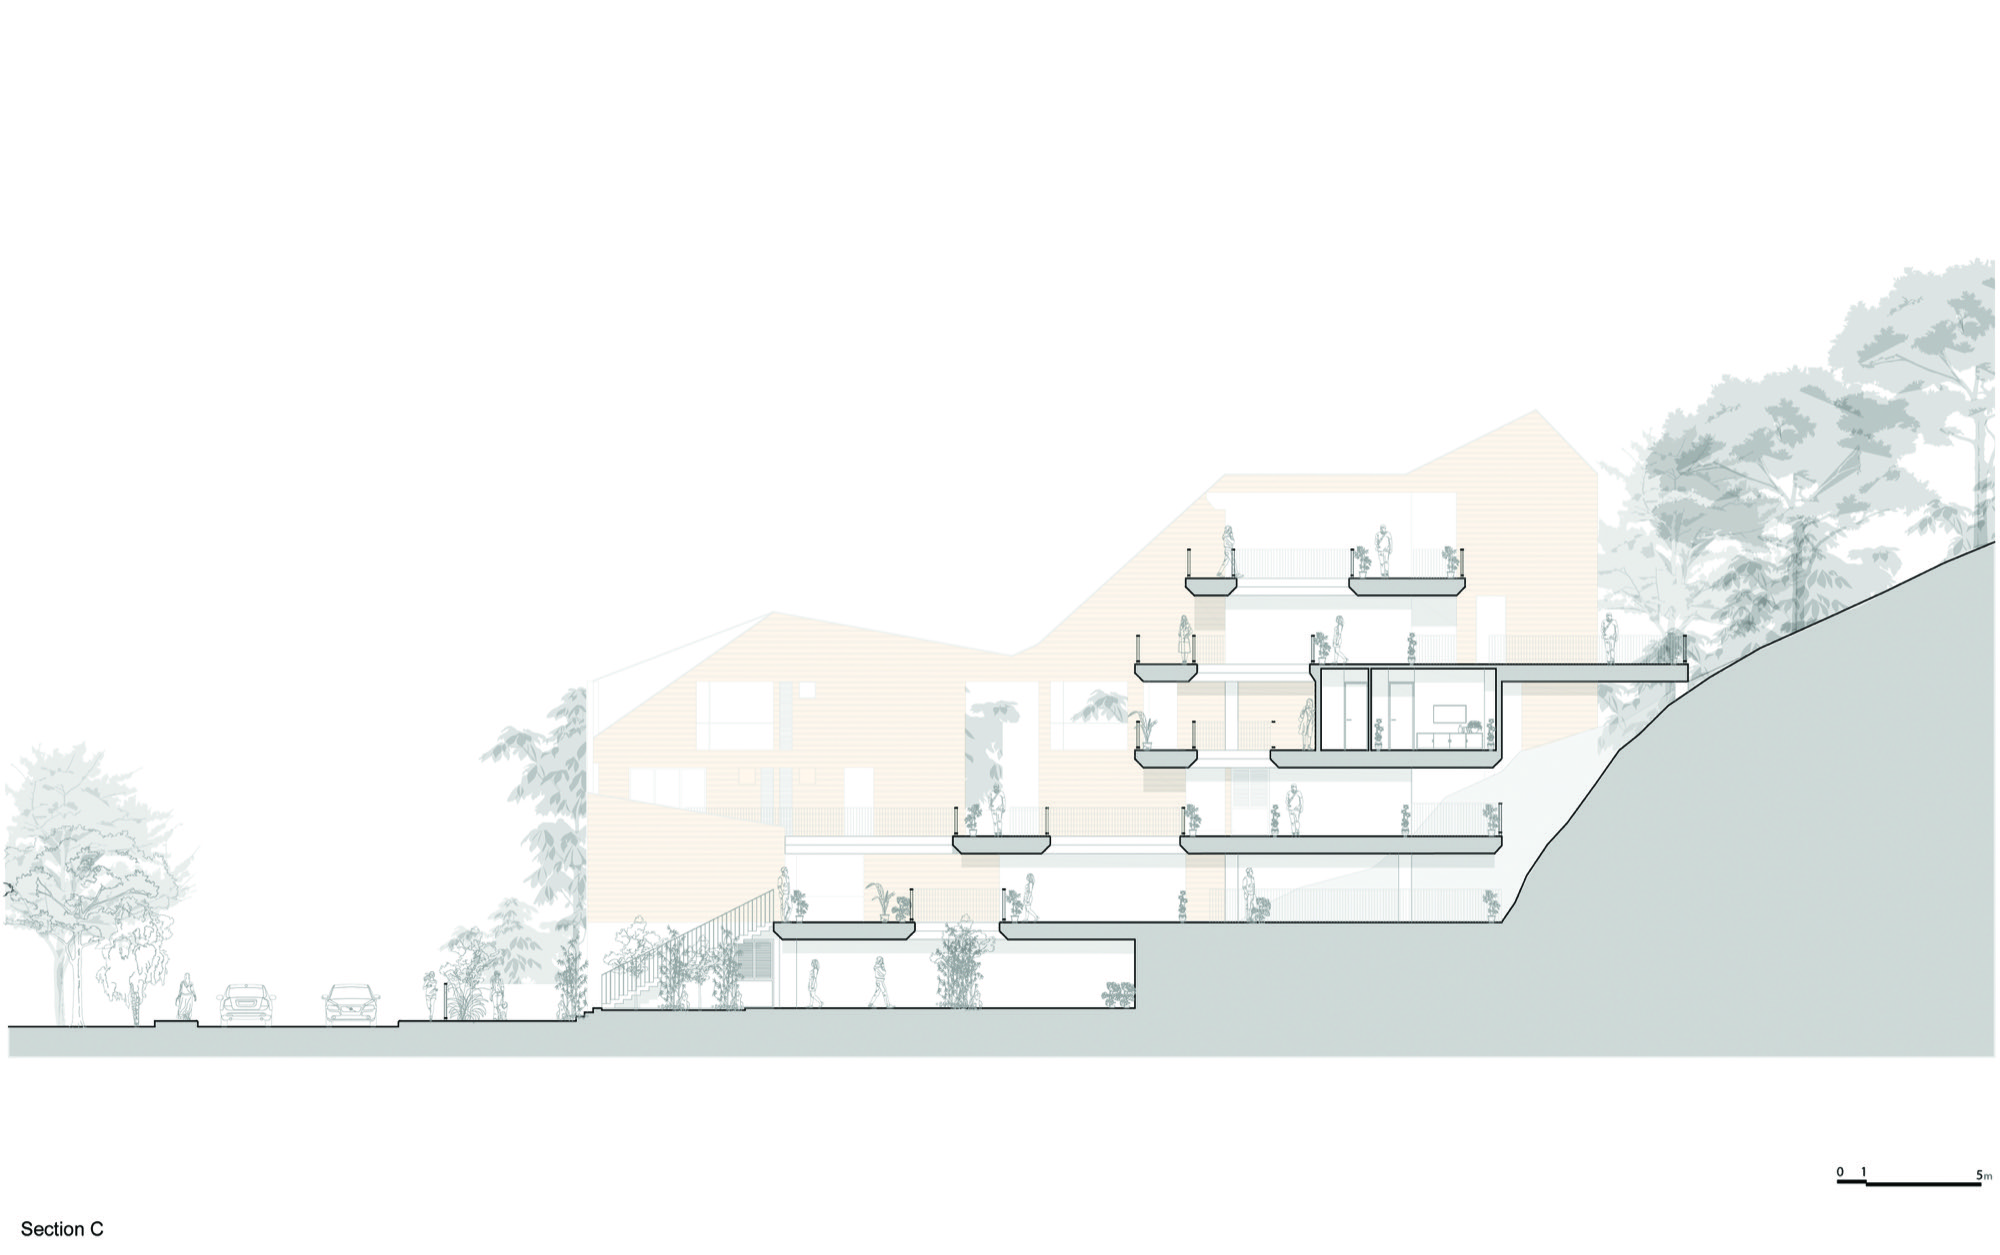 Goa Micro Housing - An unbuilt housing project by Between Spaces Architects 14